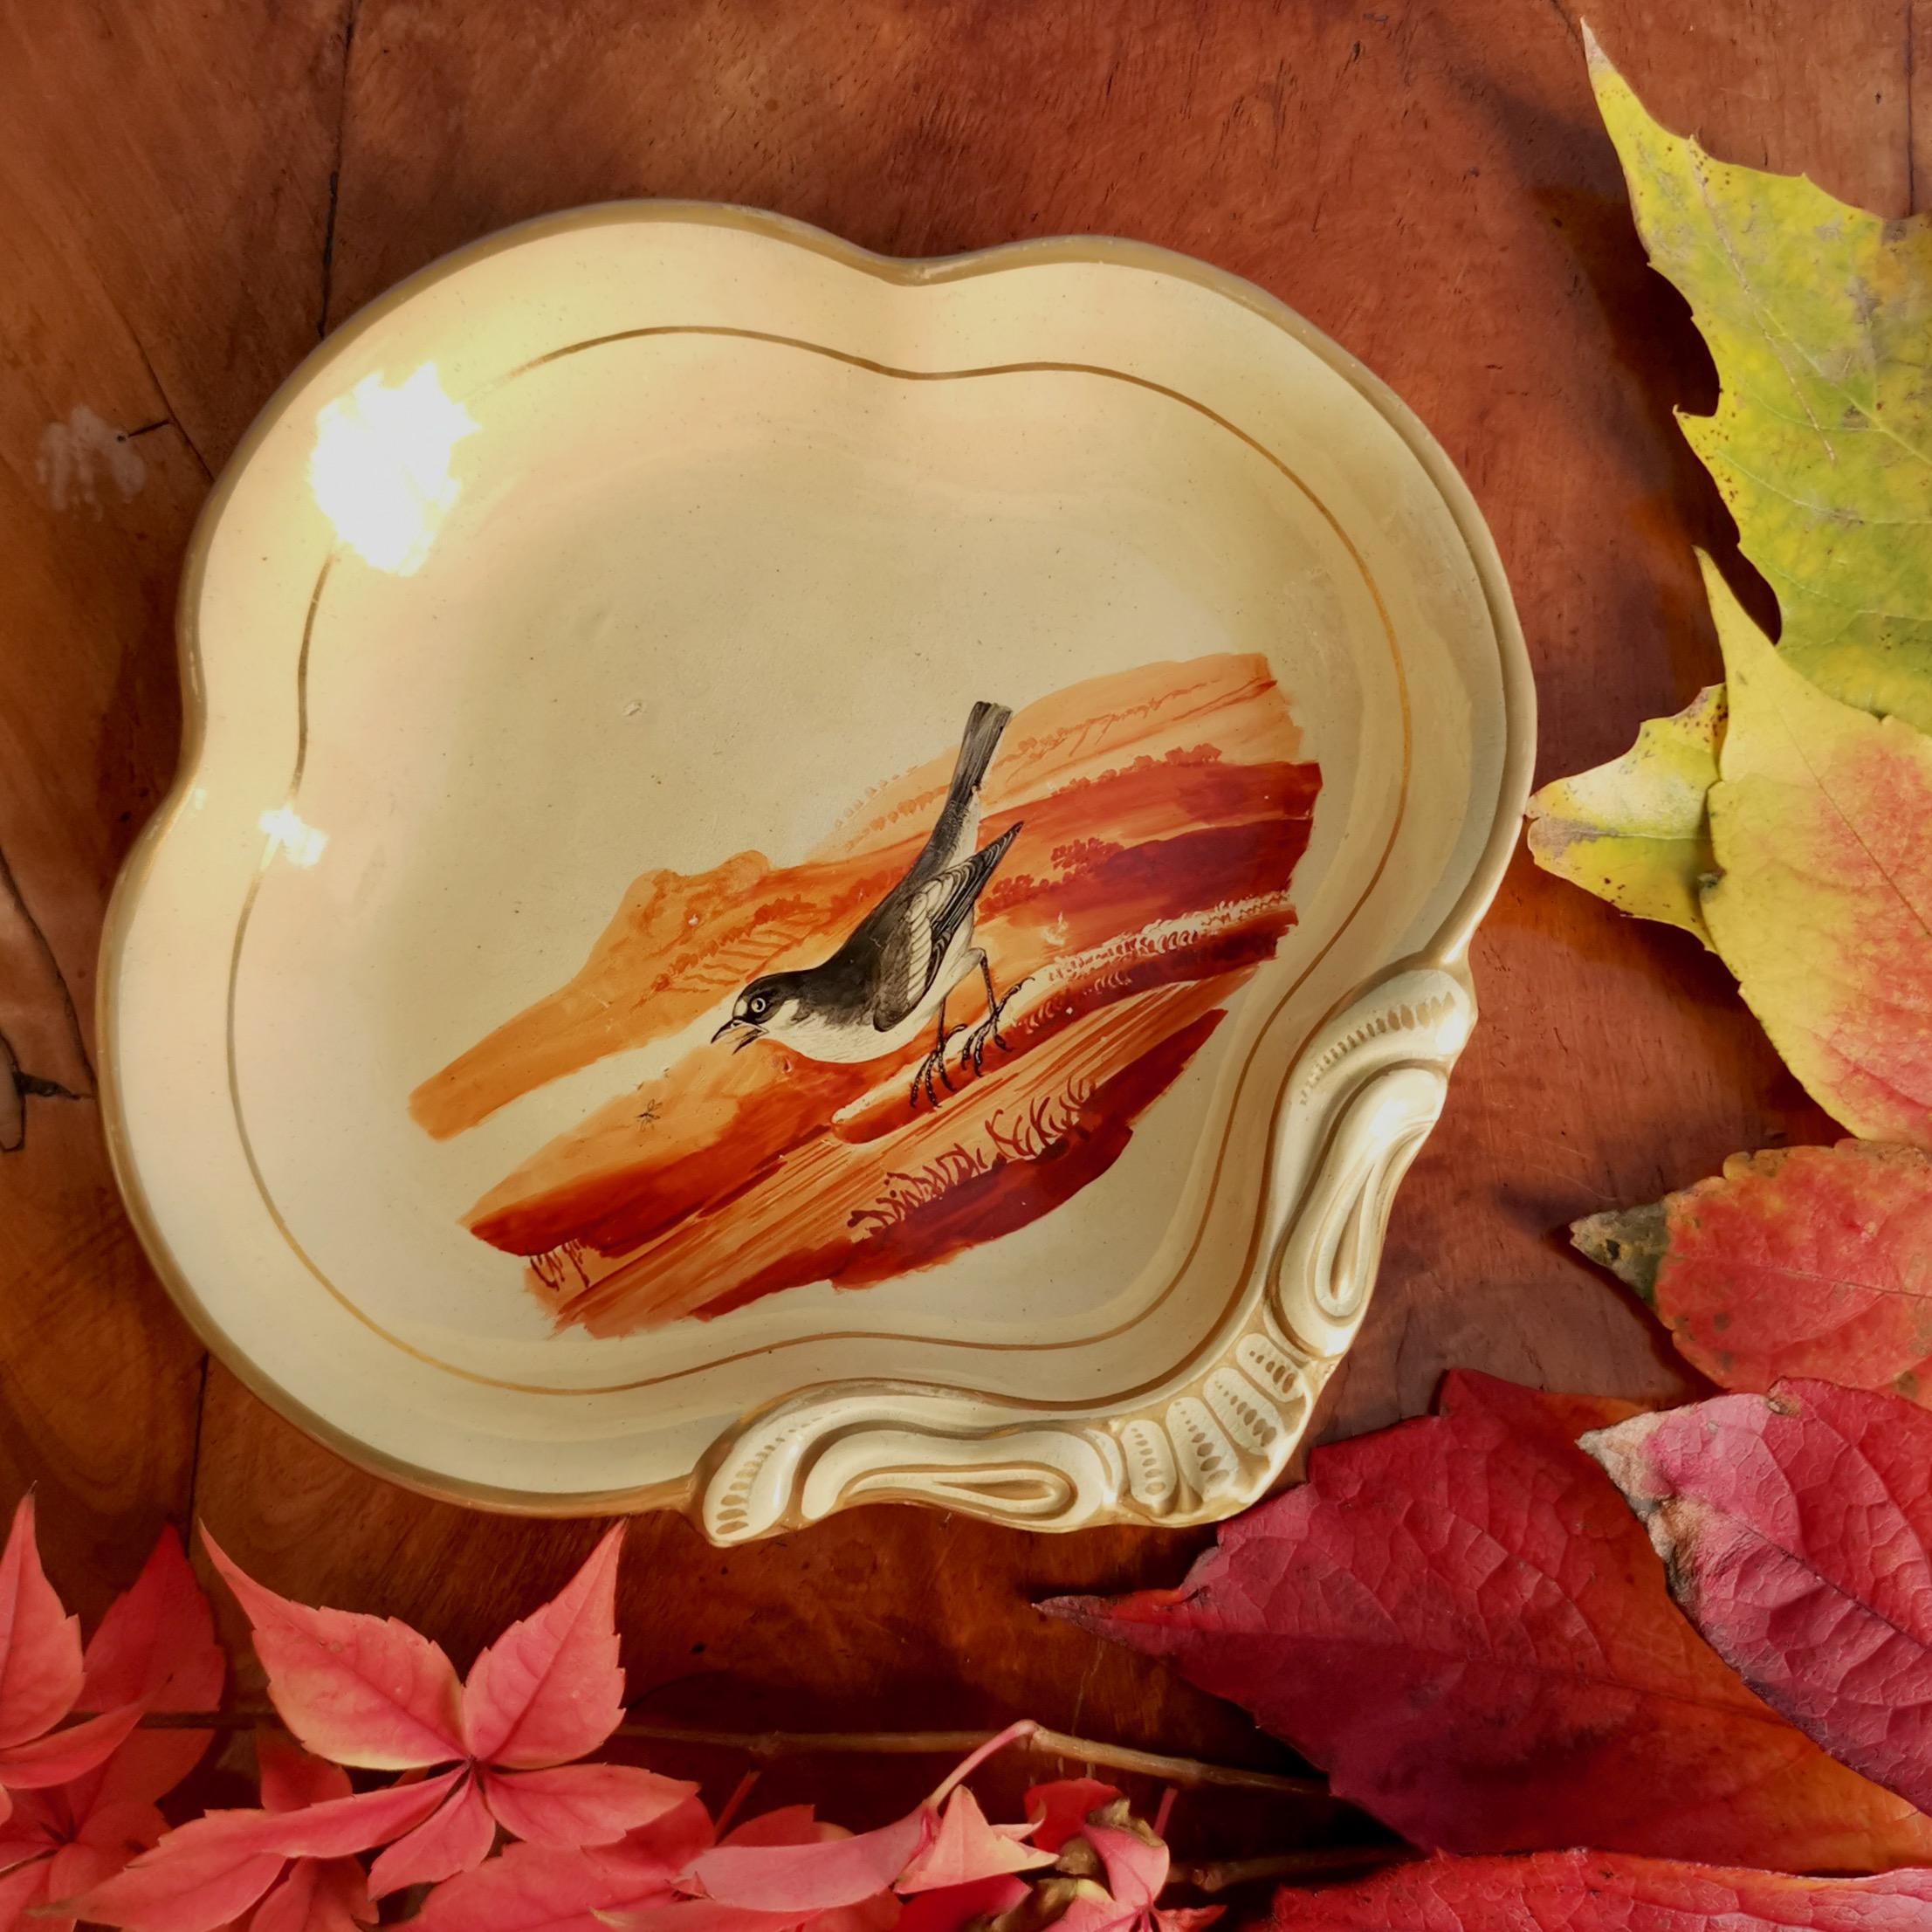 This is a very charming drabware shell dish made by Ridgway in circa 1808. The dish has a beautiful beige ground and is painted with a bird in iron red.

Ridgway was one of the pioneers of English china production alongside other great potters